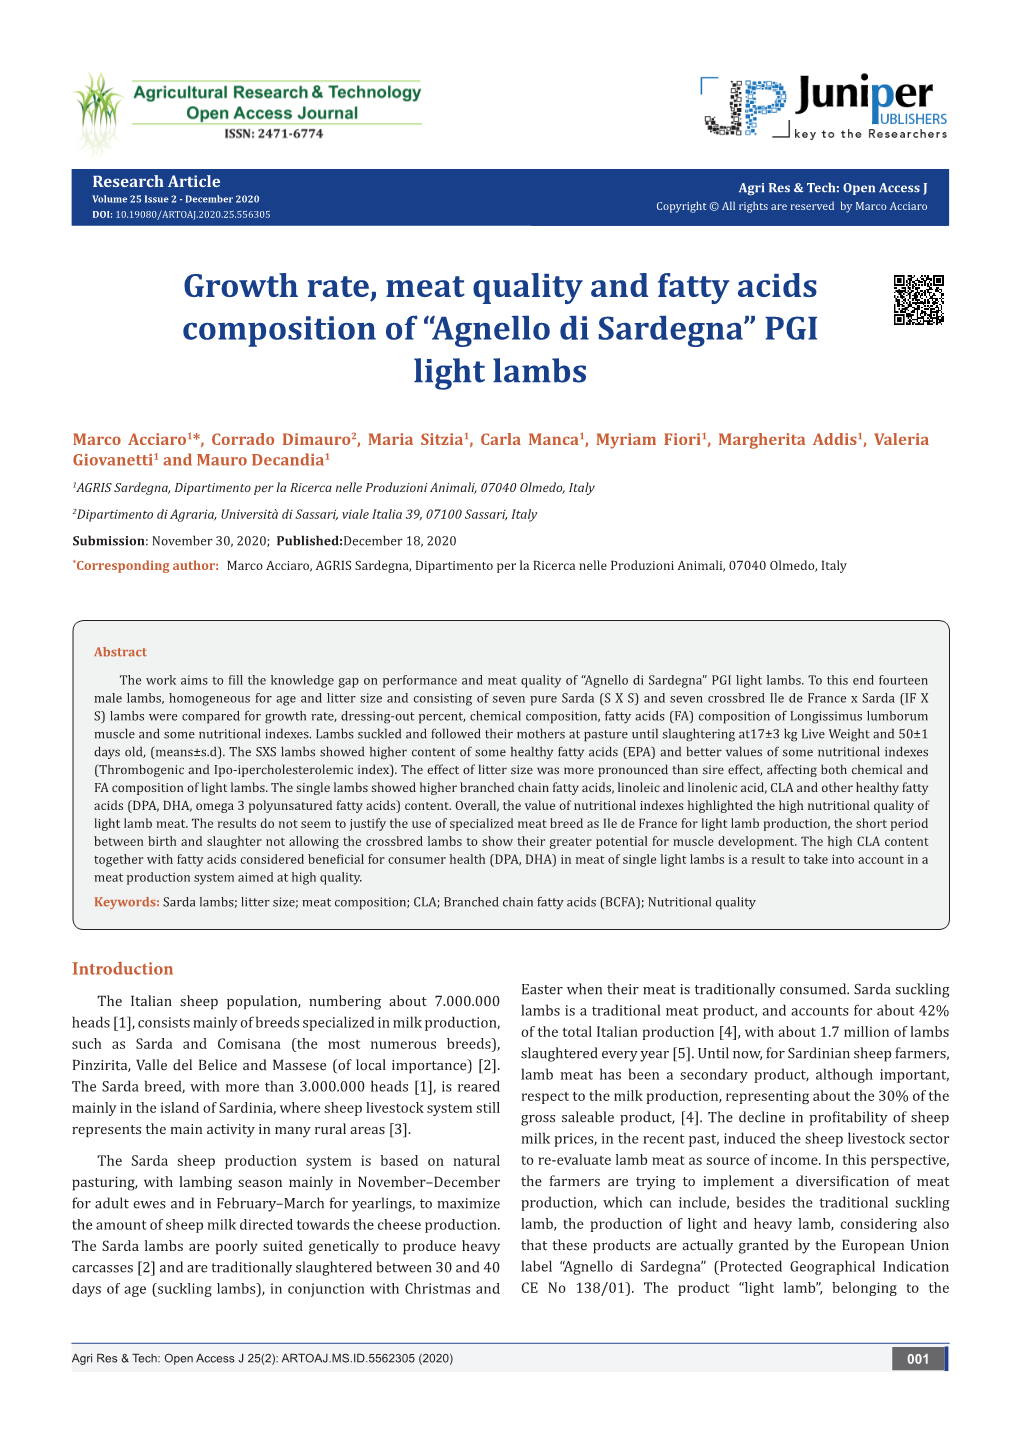 Growth Rate, Meat Quality and Fatty Acids Composition of “Agnello Di Sardegna” PGI Light Lambs